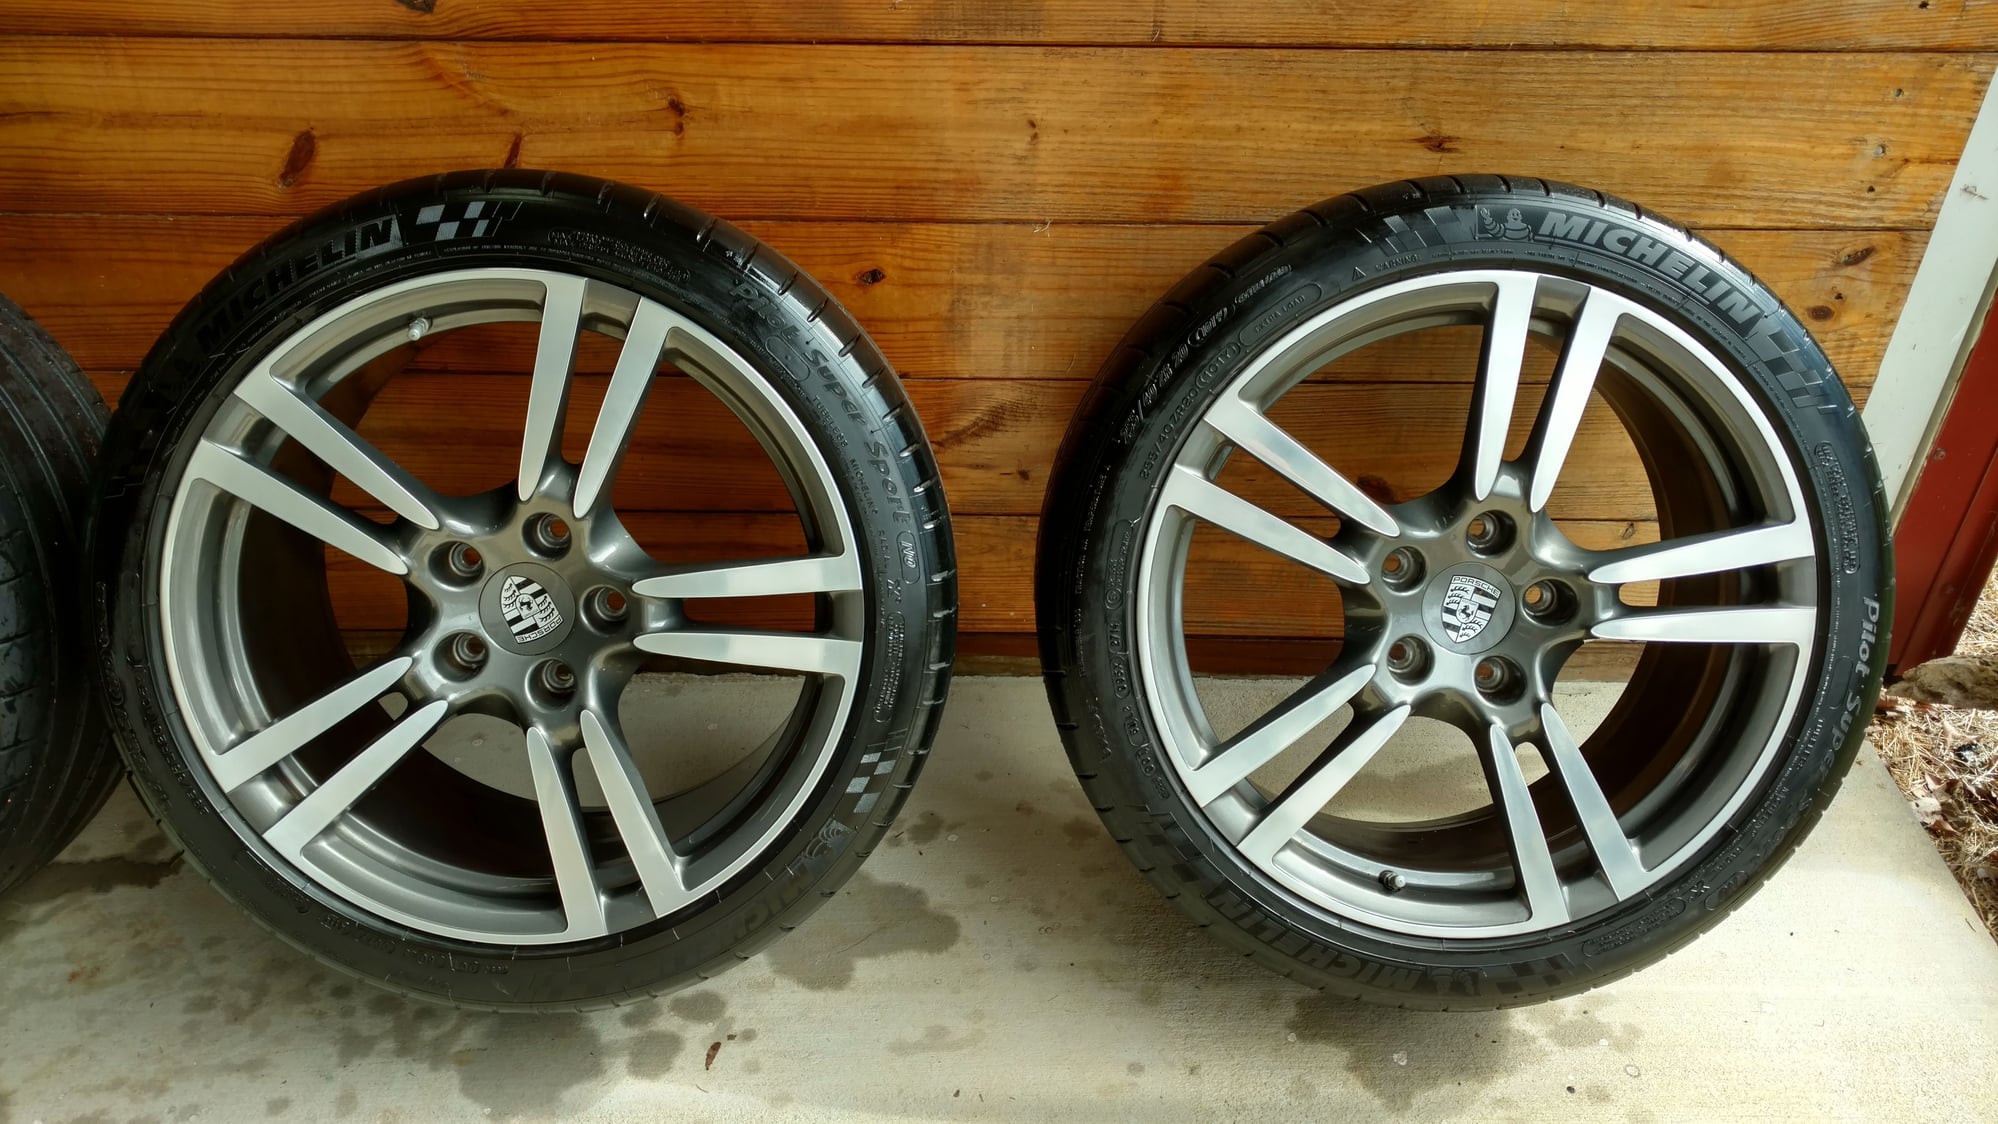 Wheels and Tires/Axles - 20" OEM Porsche Turbo II wheels in exc condition & Michelin Pilot Super Sport tires - Used - 2010 to 2019 Porsche All Models - Greensboro/raleigh, NC 27344, United States